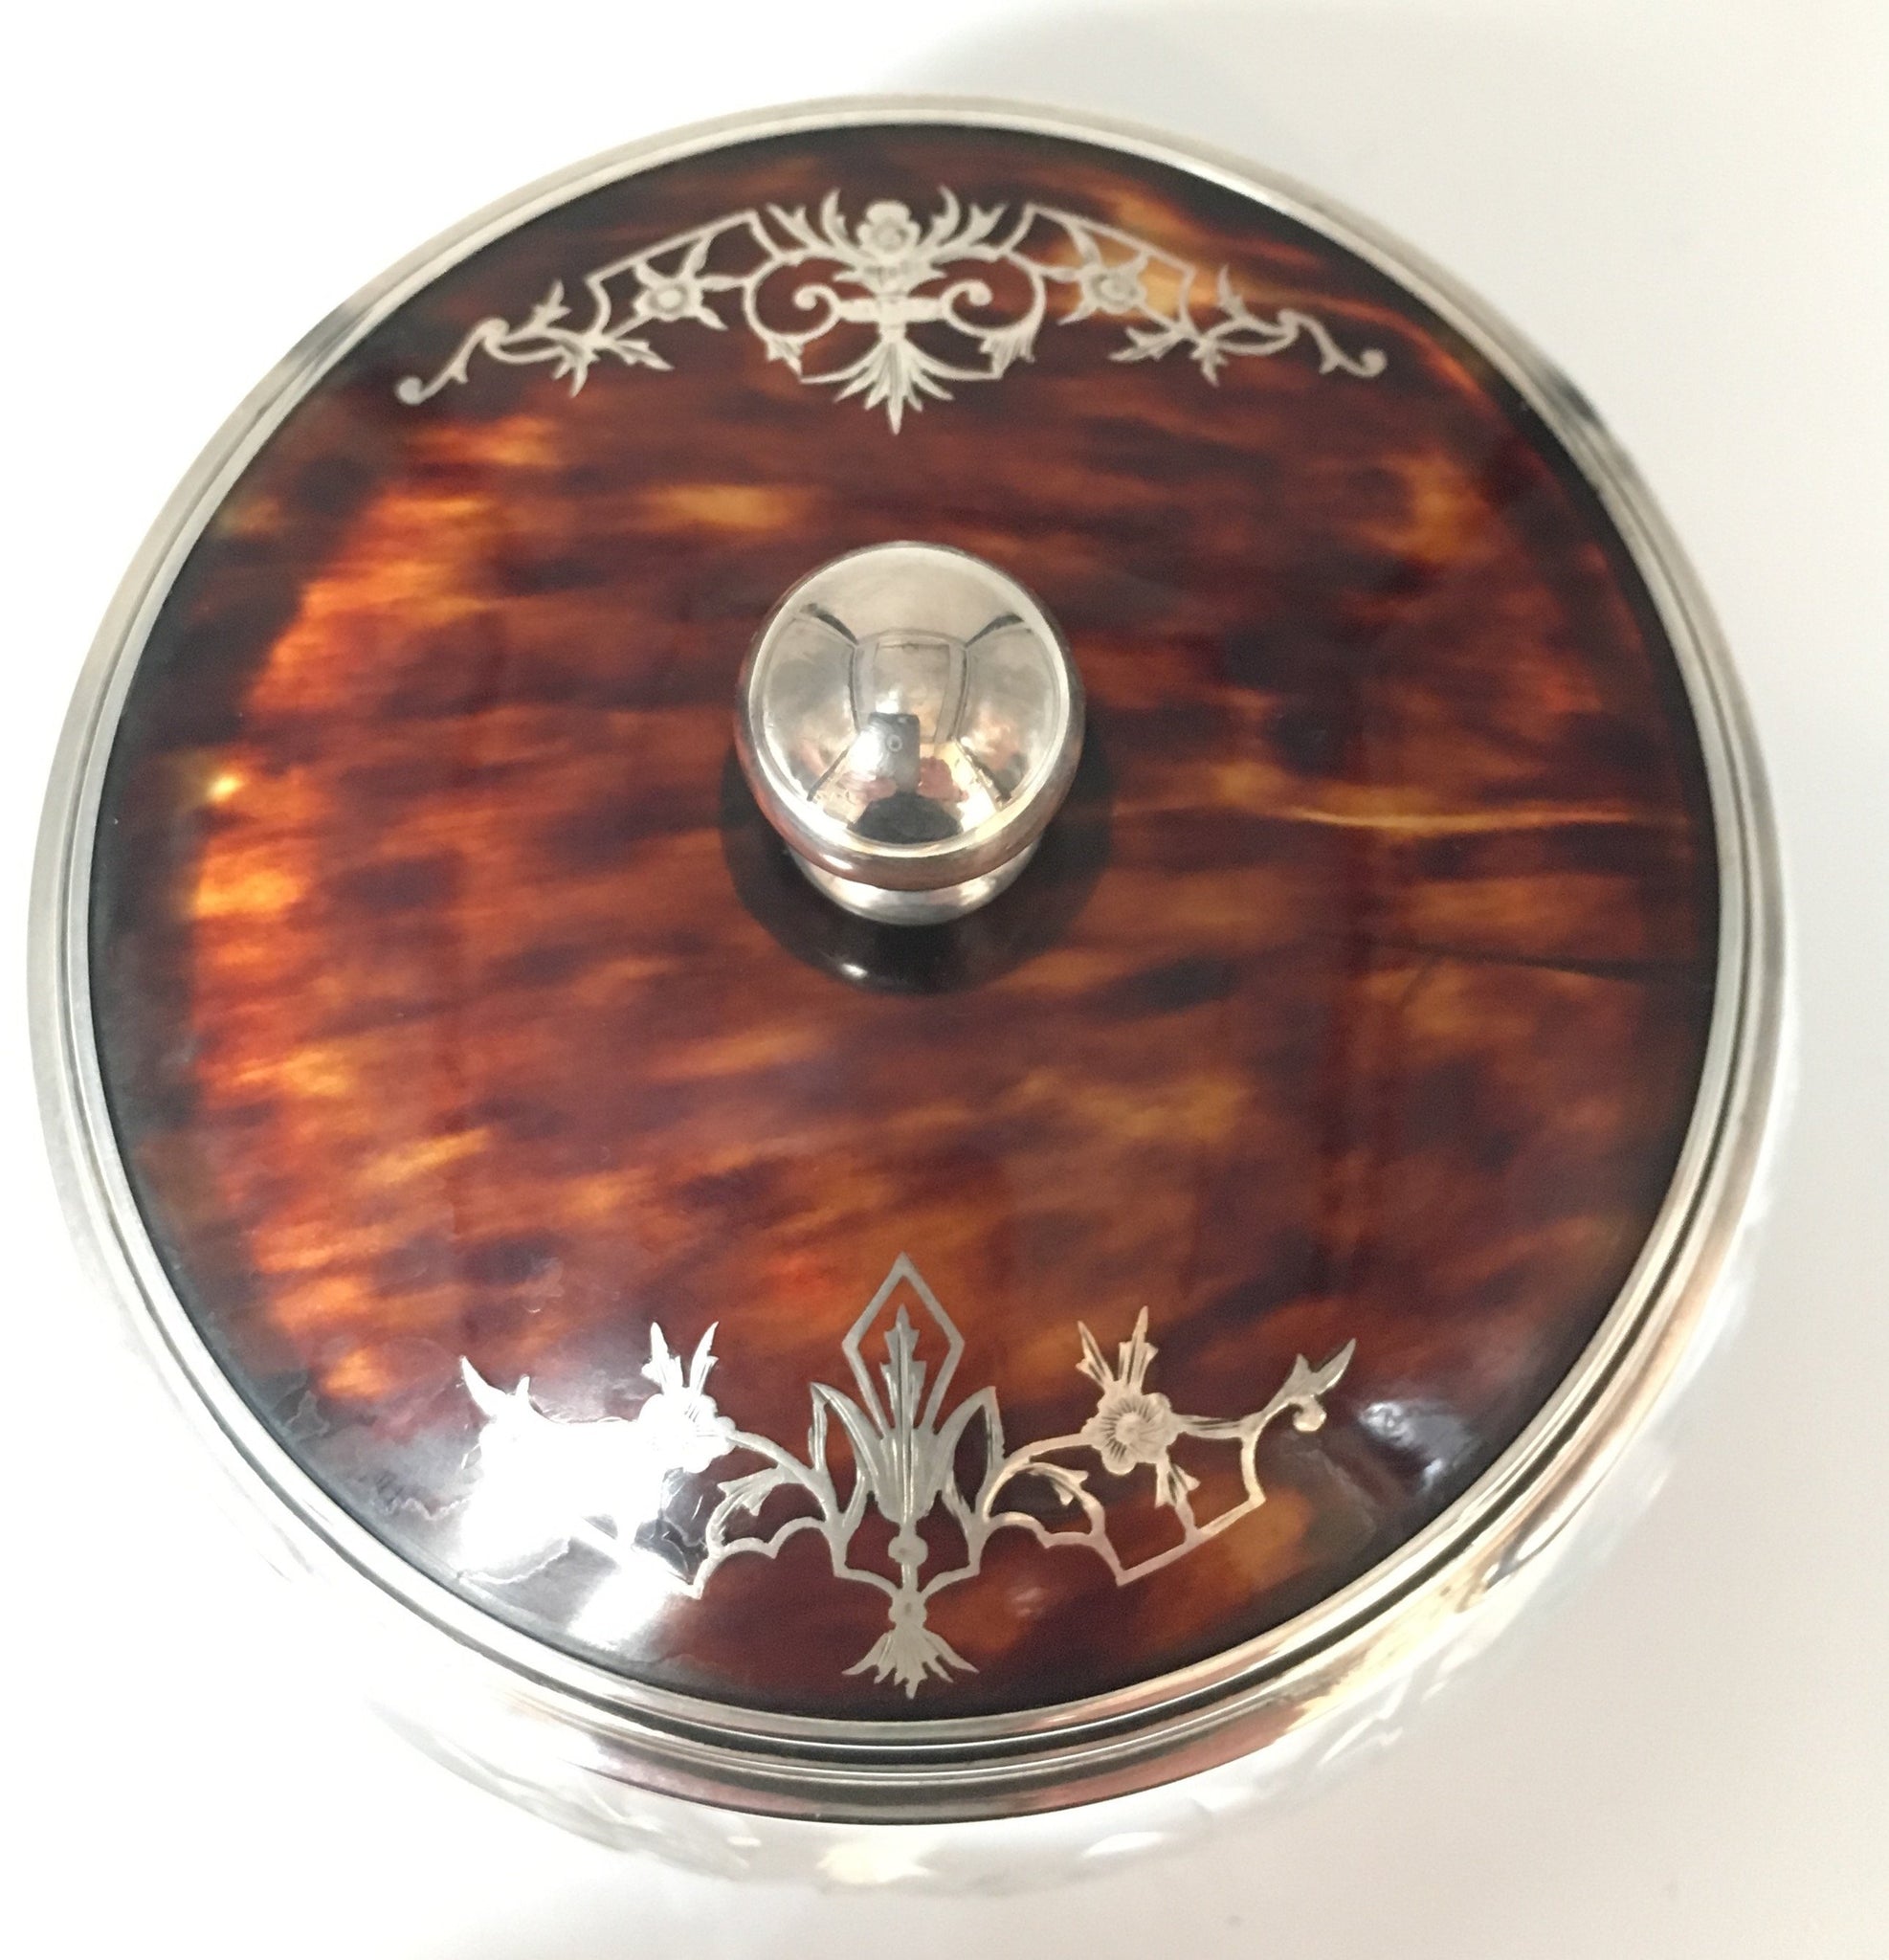 Vintage Glass Dish with Sterling Silver and Faux Tortoise Shell, SOLD